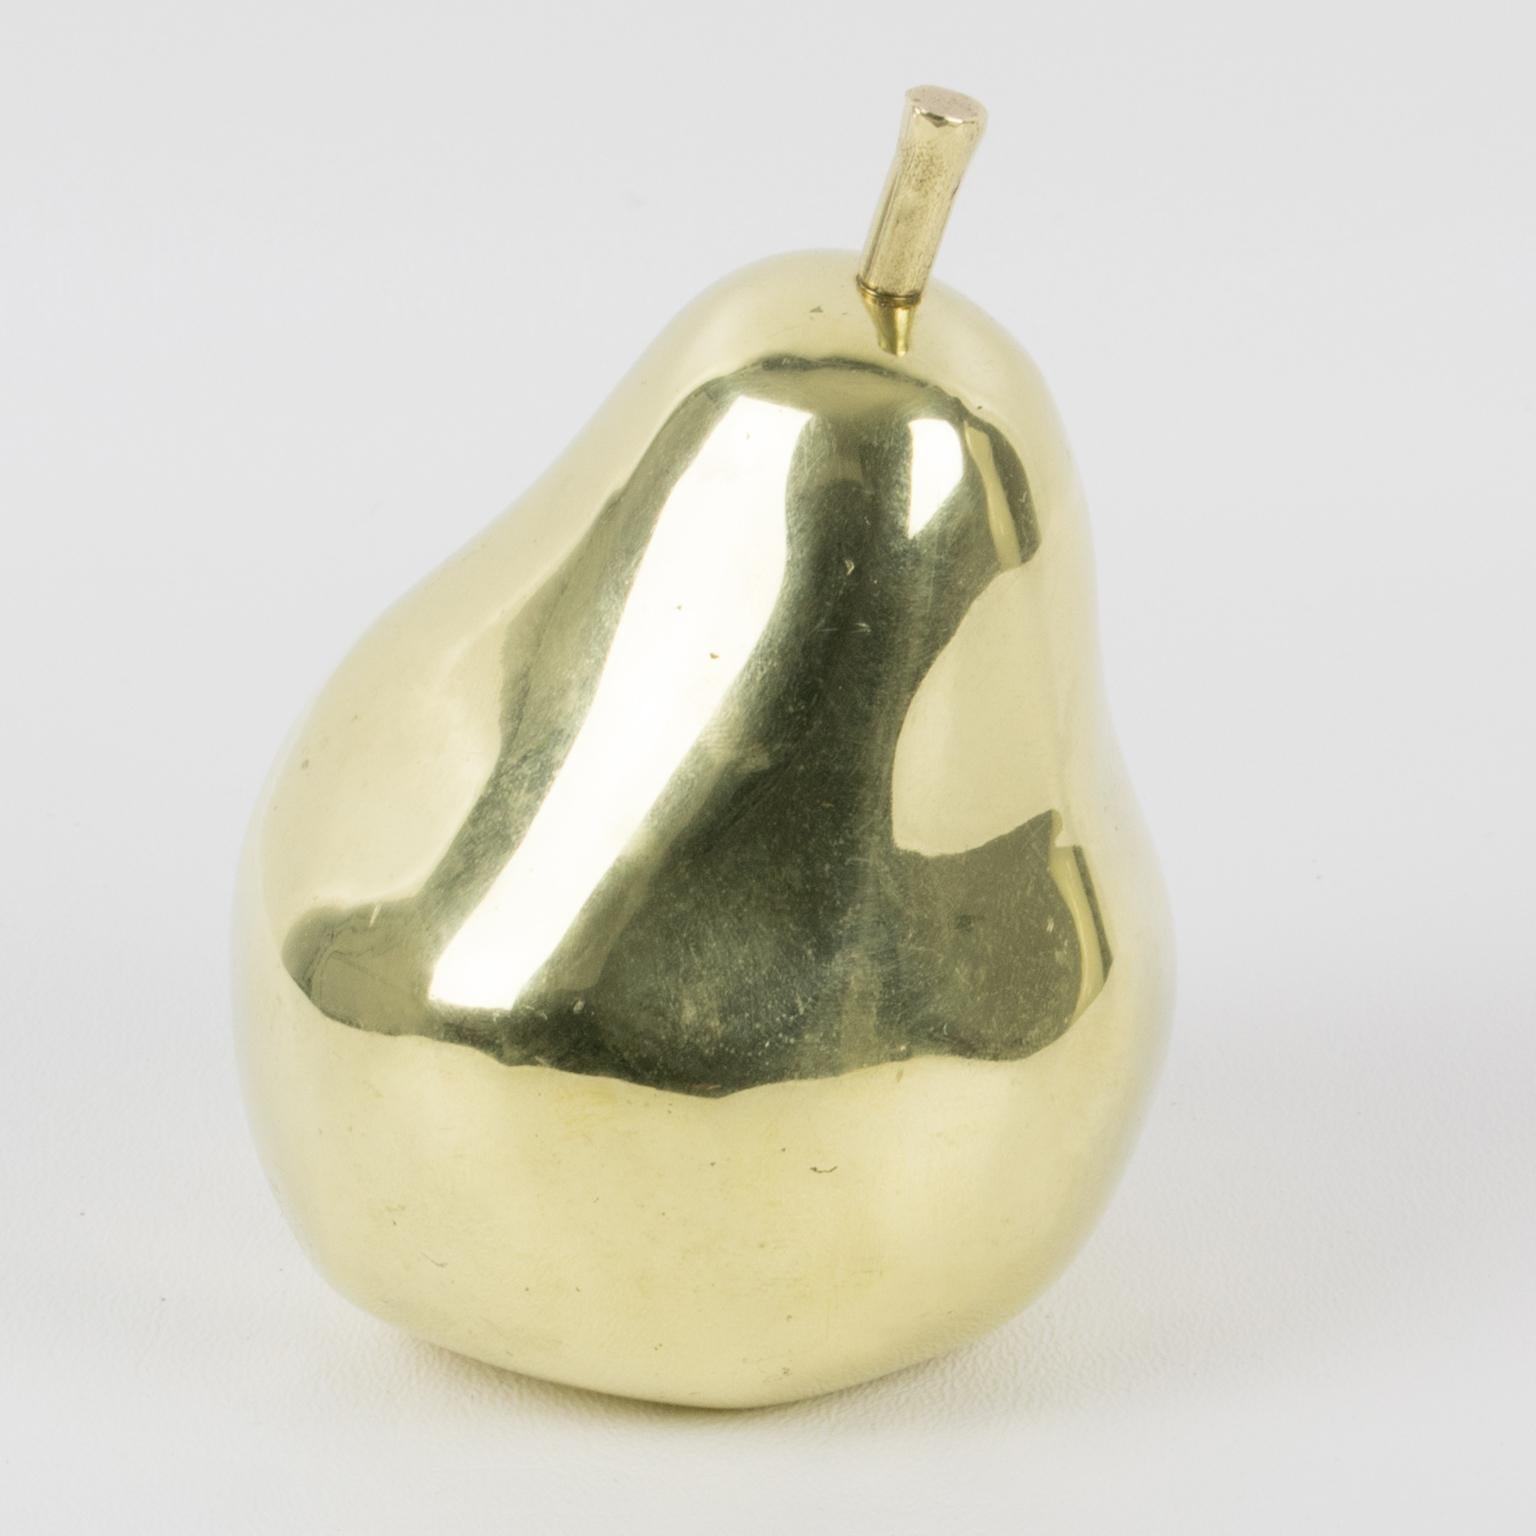 This stunning carved metal sculpture was hand-crafted by French sculptor Monique Gerber (France - 20th Century). The pear is rendered to its actual size in polished gilded bronze material. There is an engraved 